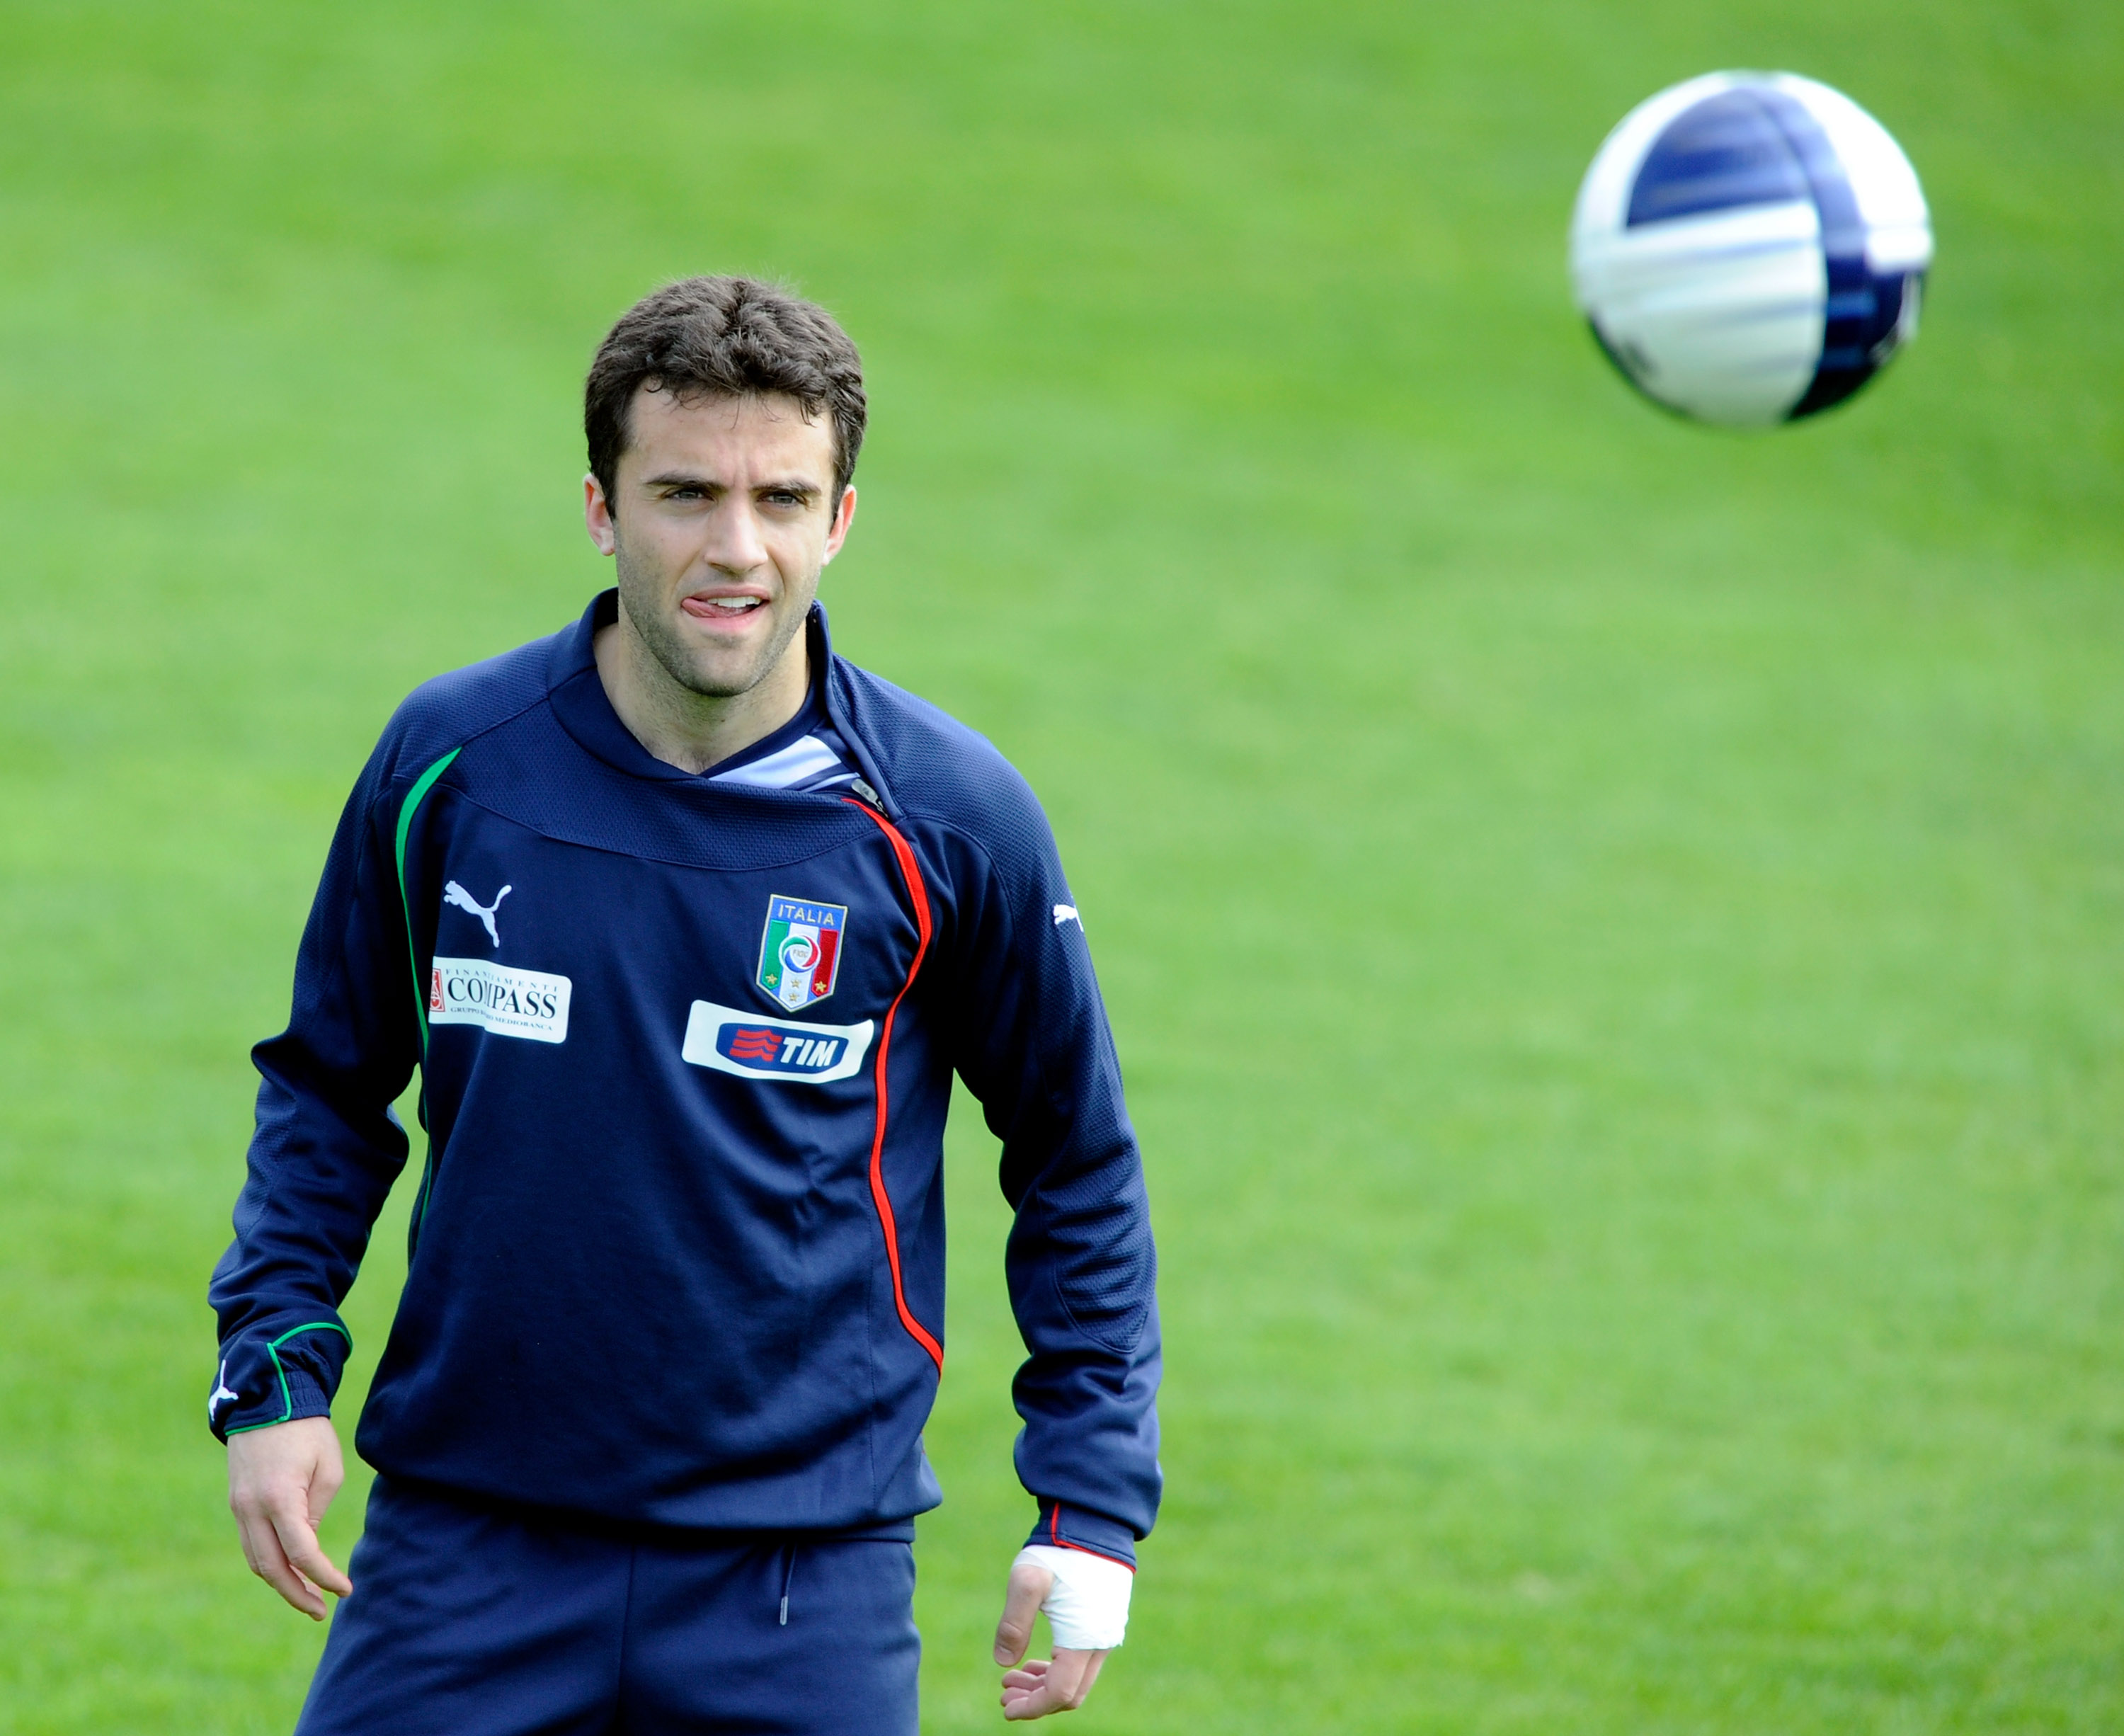 FLORENCE, ITALY - MARCH 27:  Giuseppe Rossi of Italy during a training session at Coverciano on March 27, 2011 in Florence, Italy.  (Photo by Claudio Villa/Getty Images)